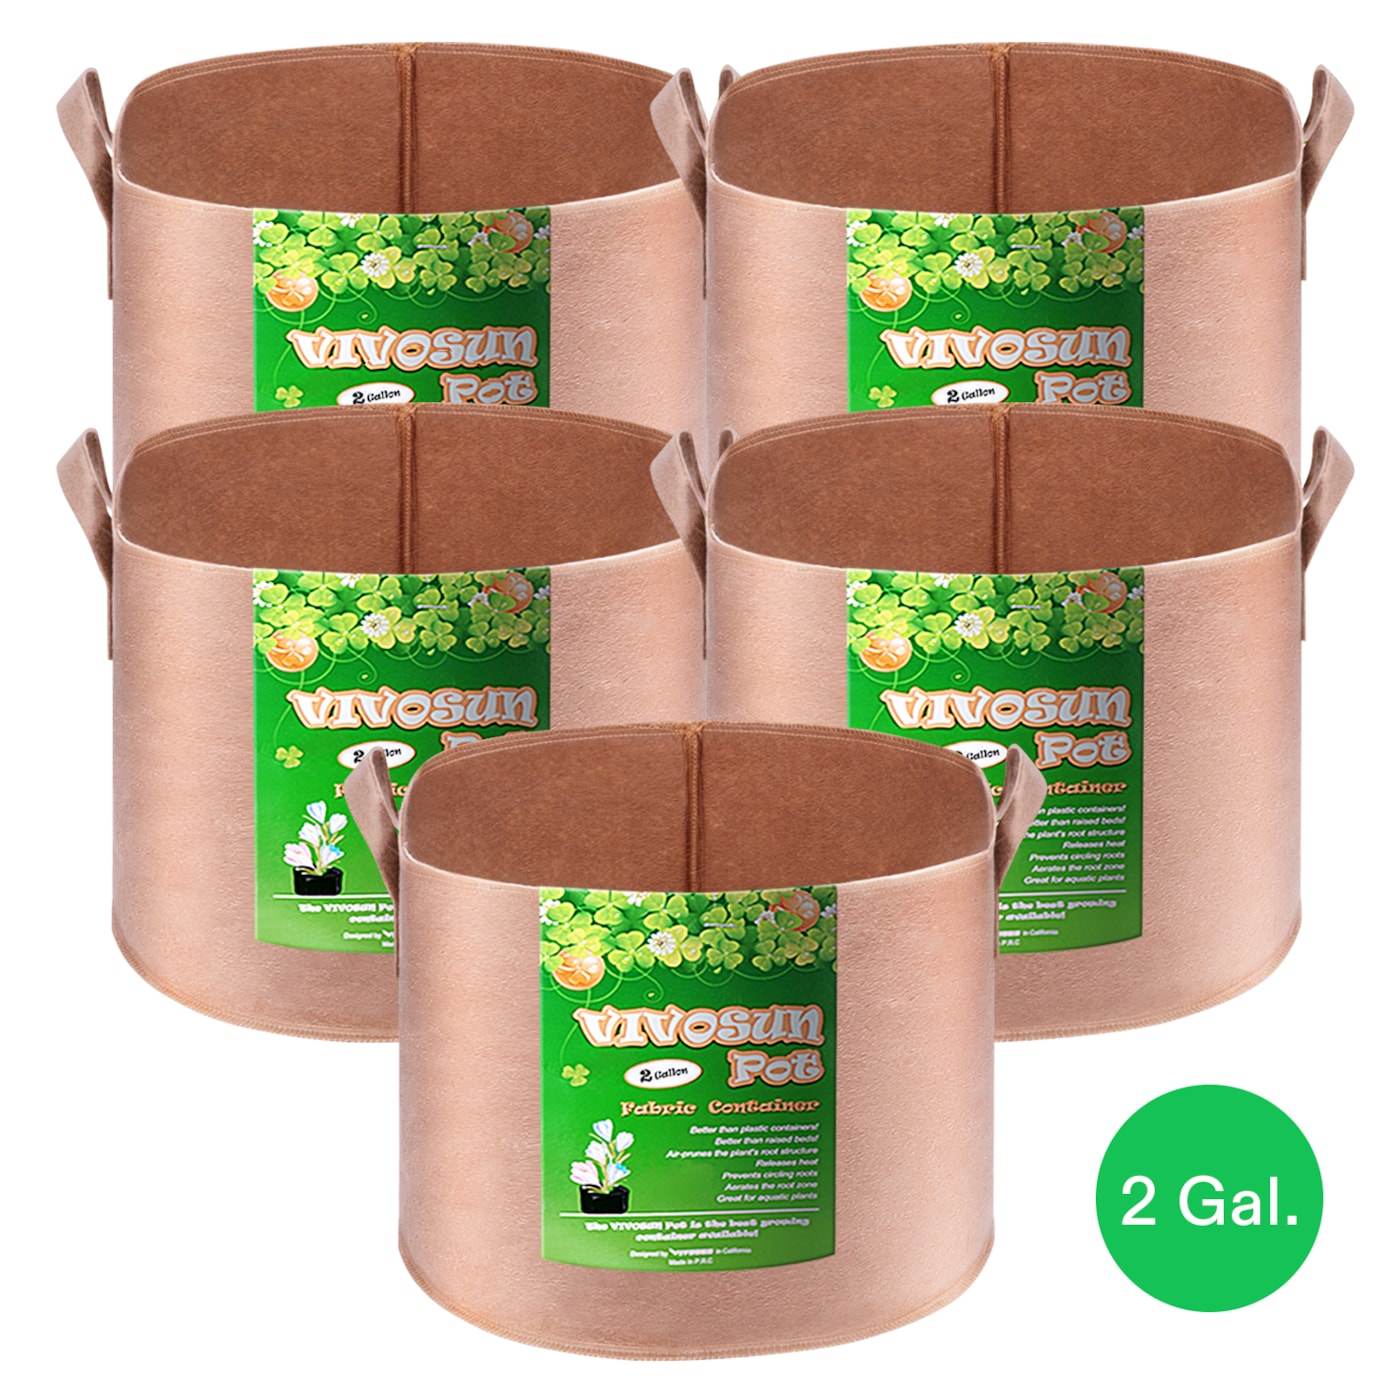 VIVOSUN 2 Gallon Grow Bags 5-Pack Brown Thickened Nonwoven Fabric Pots with Handles